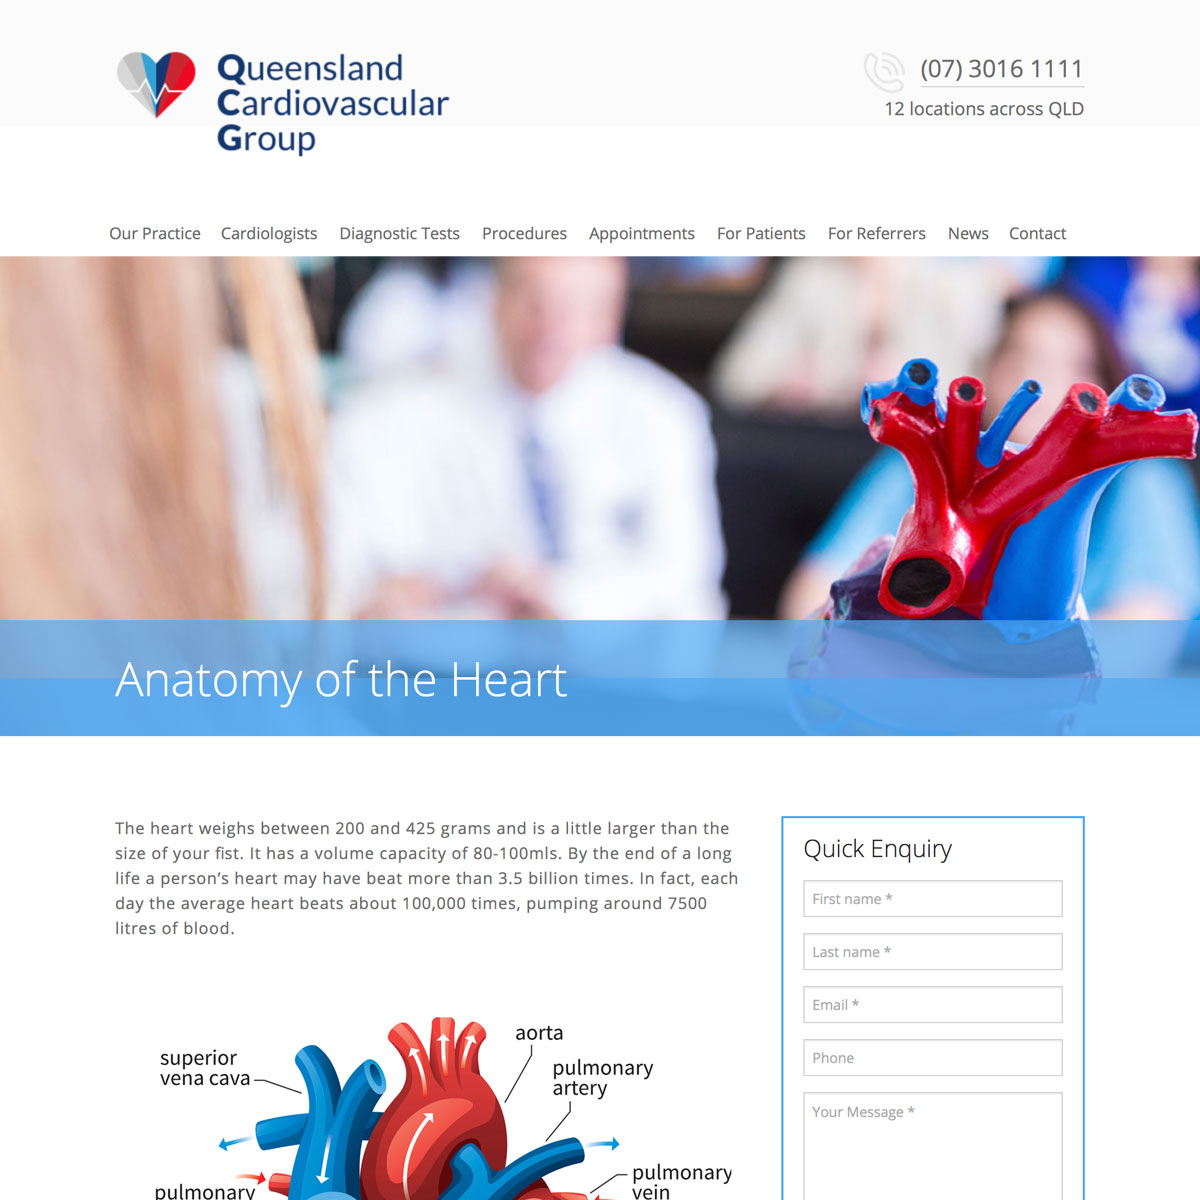 Queensland Cardiovascular Group - For Patients